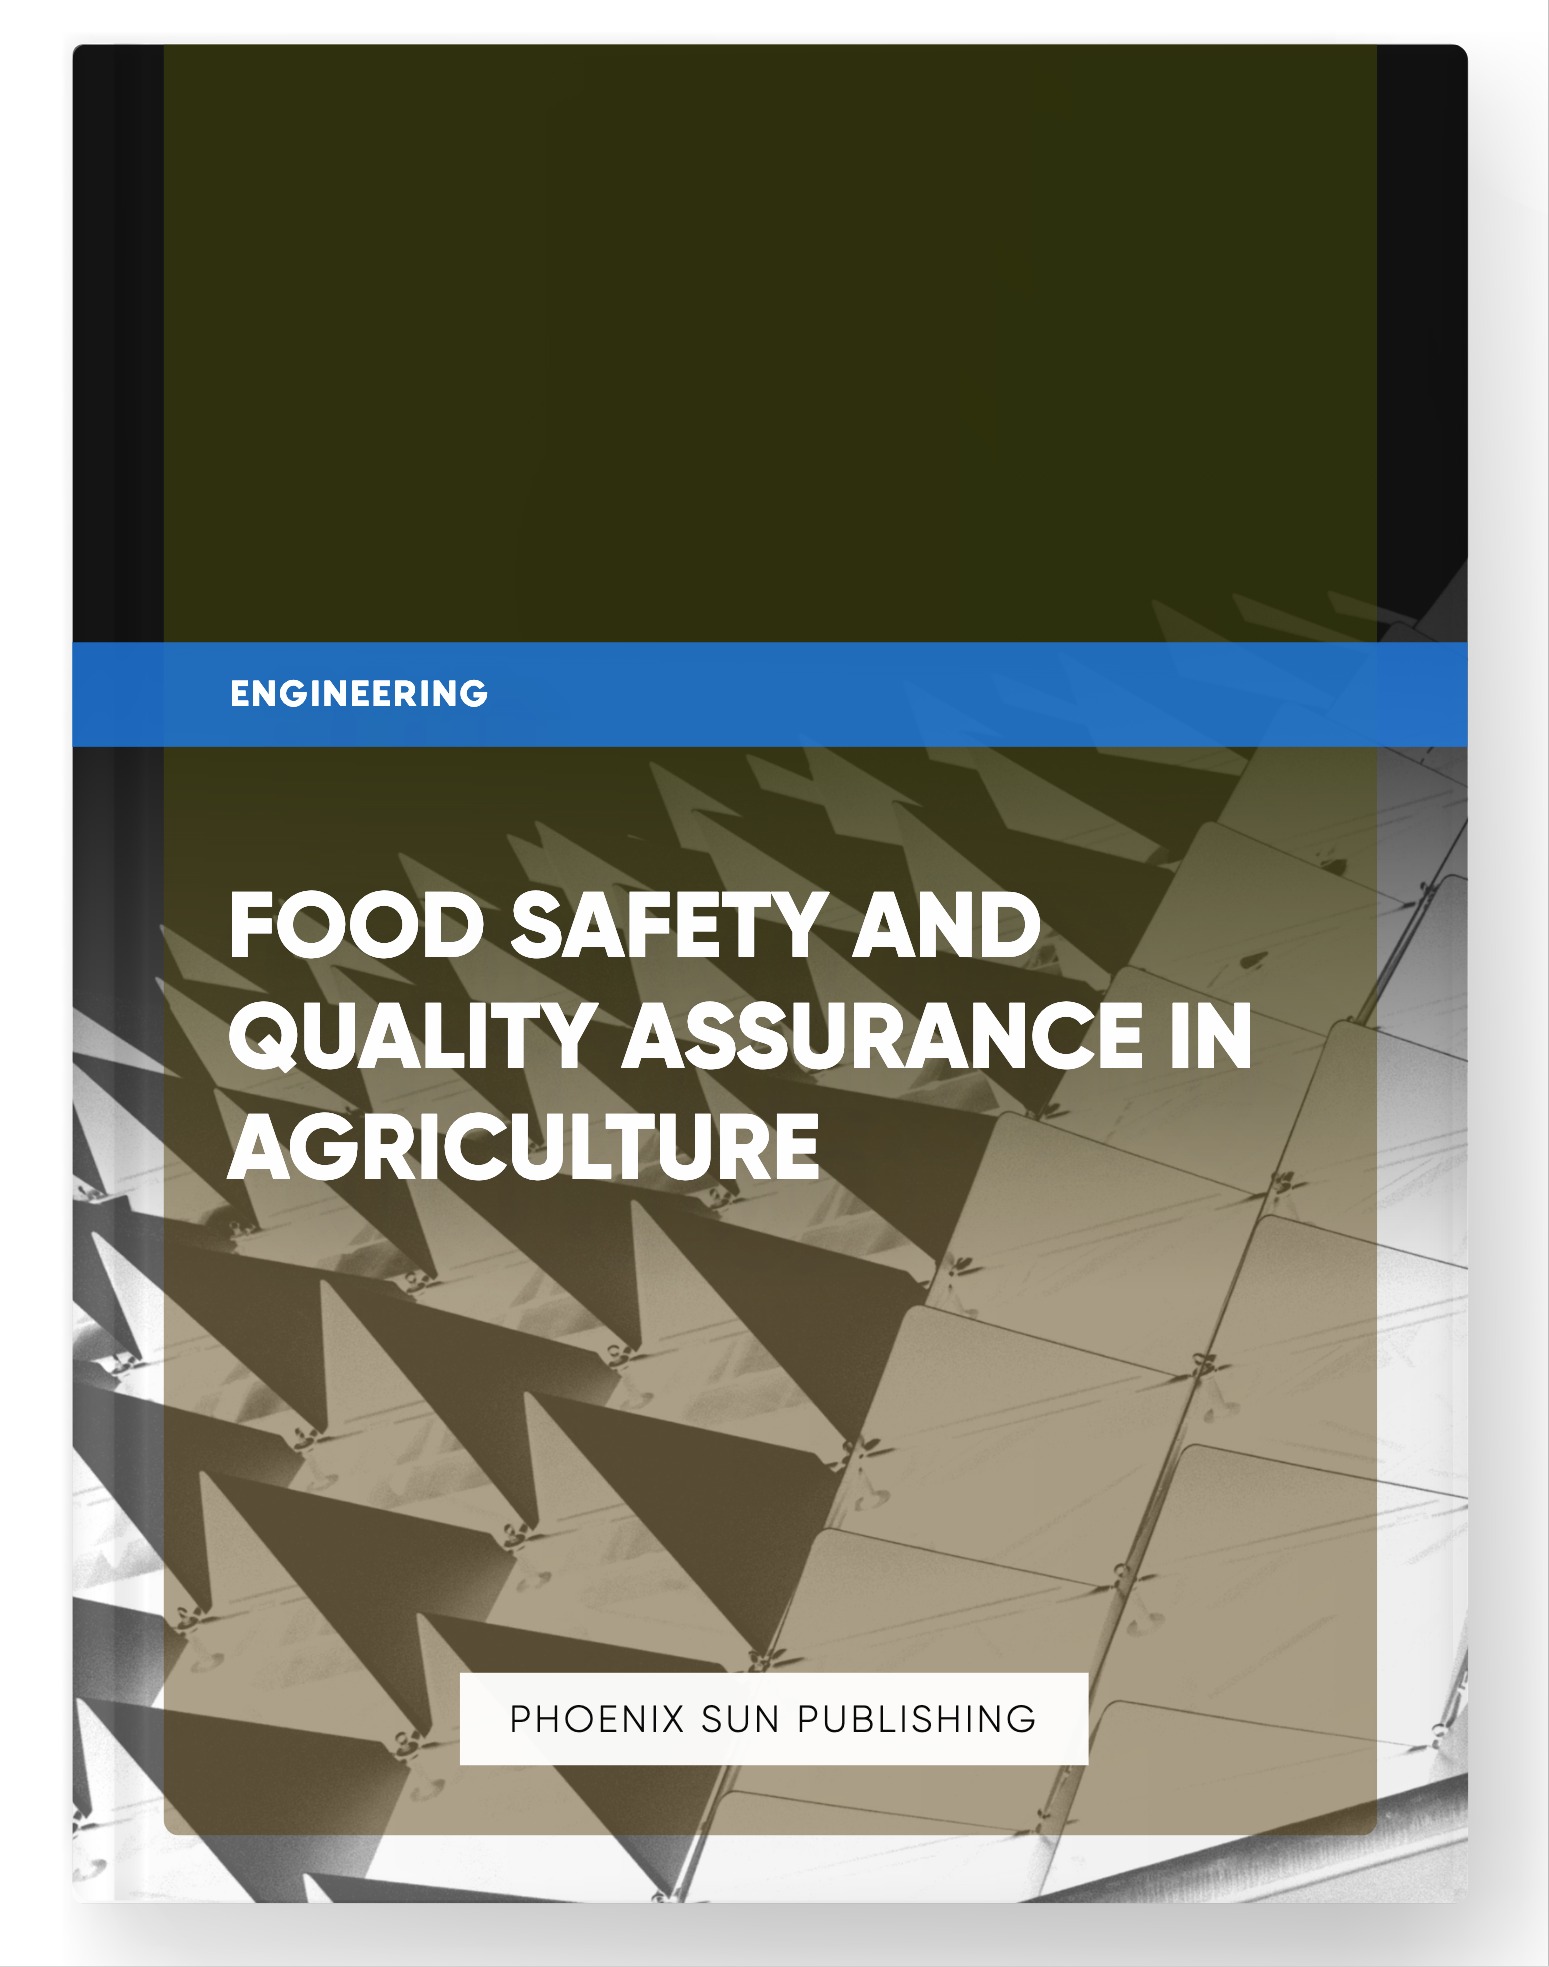 Food Safety and Quality Assurance in Agriculture